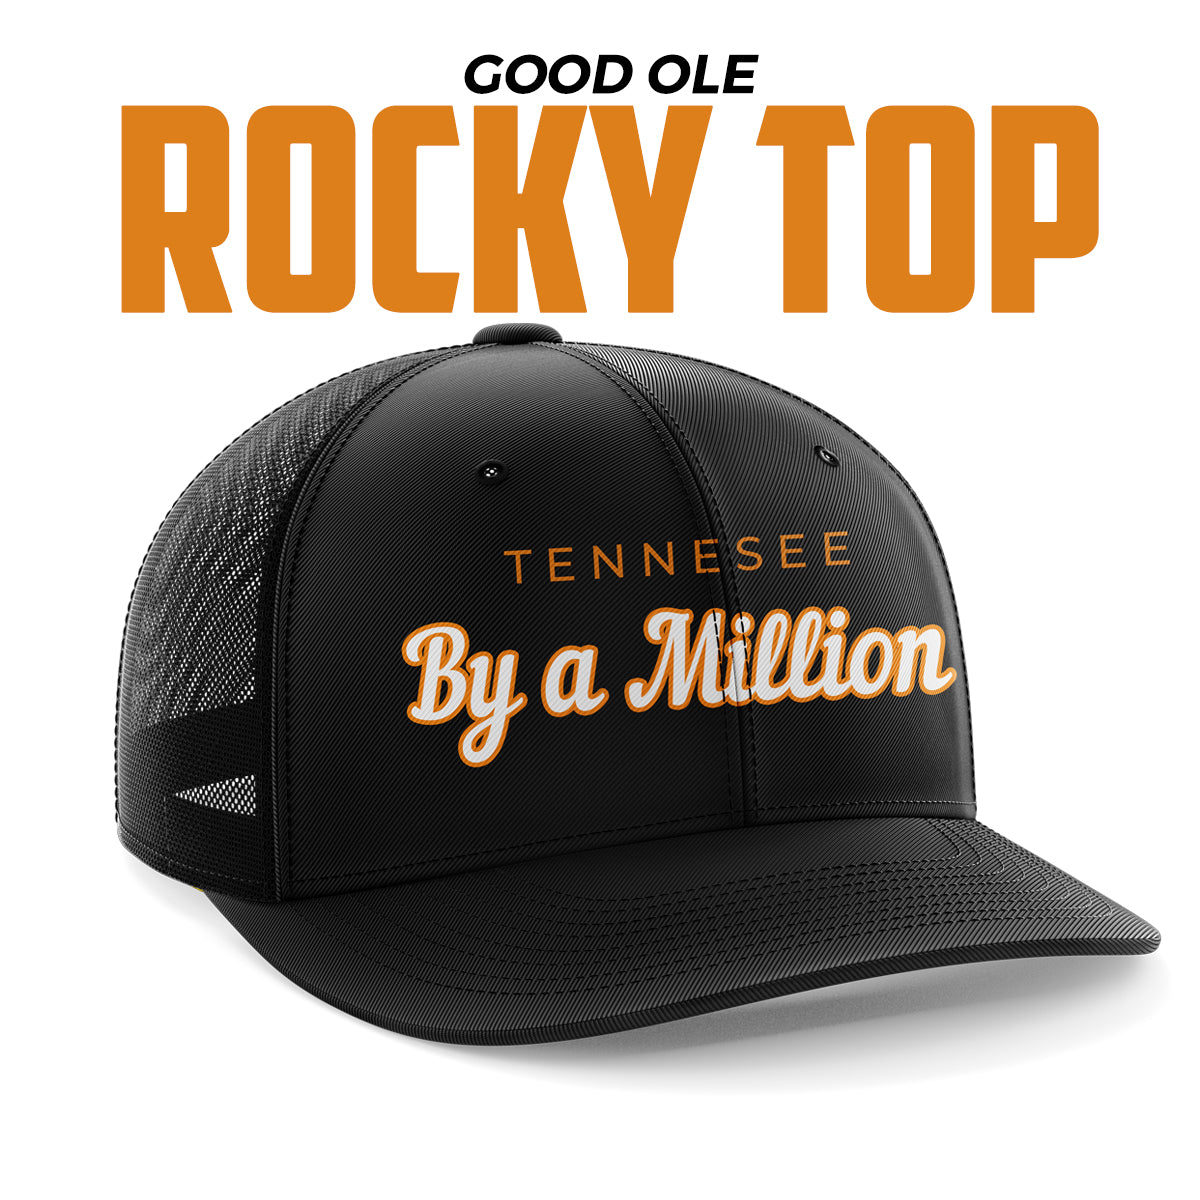 Tennessee By a Million Trucker Hat